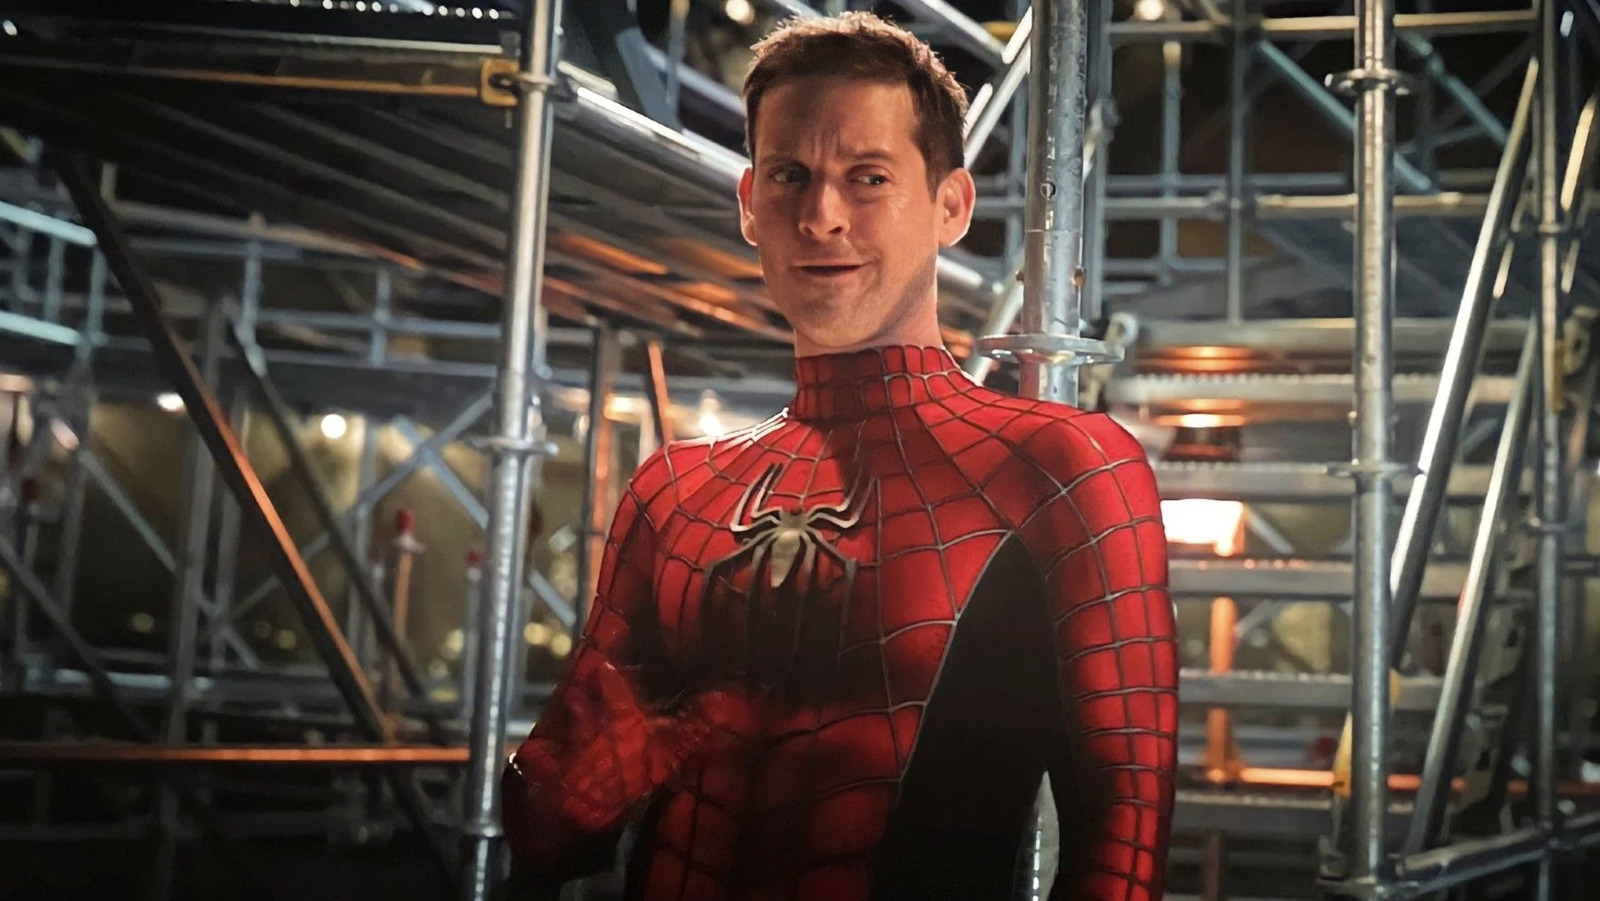 Here's How Sam Raimi Reacted To Seeing Tobey Maguire Play Peter Parker  Again In Spider-Man: No Way Home